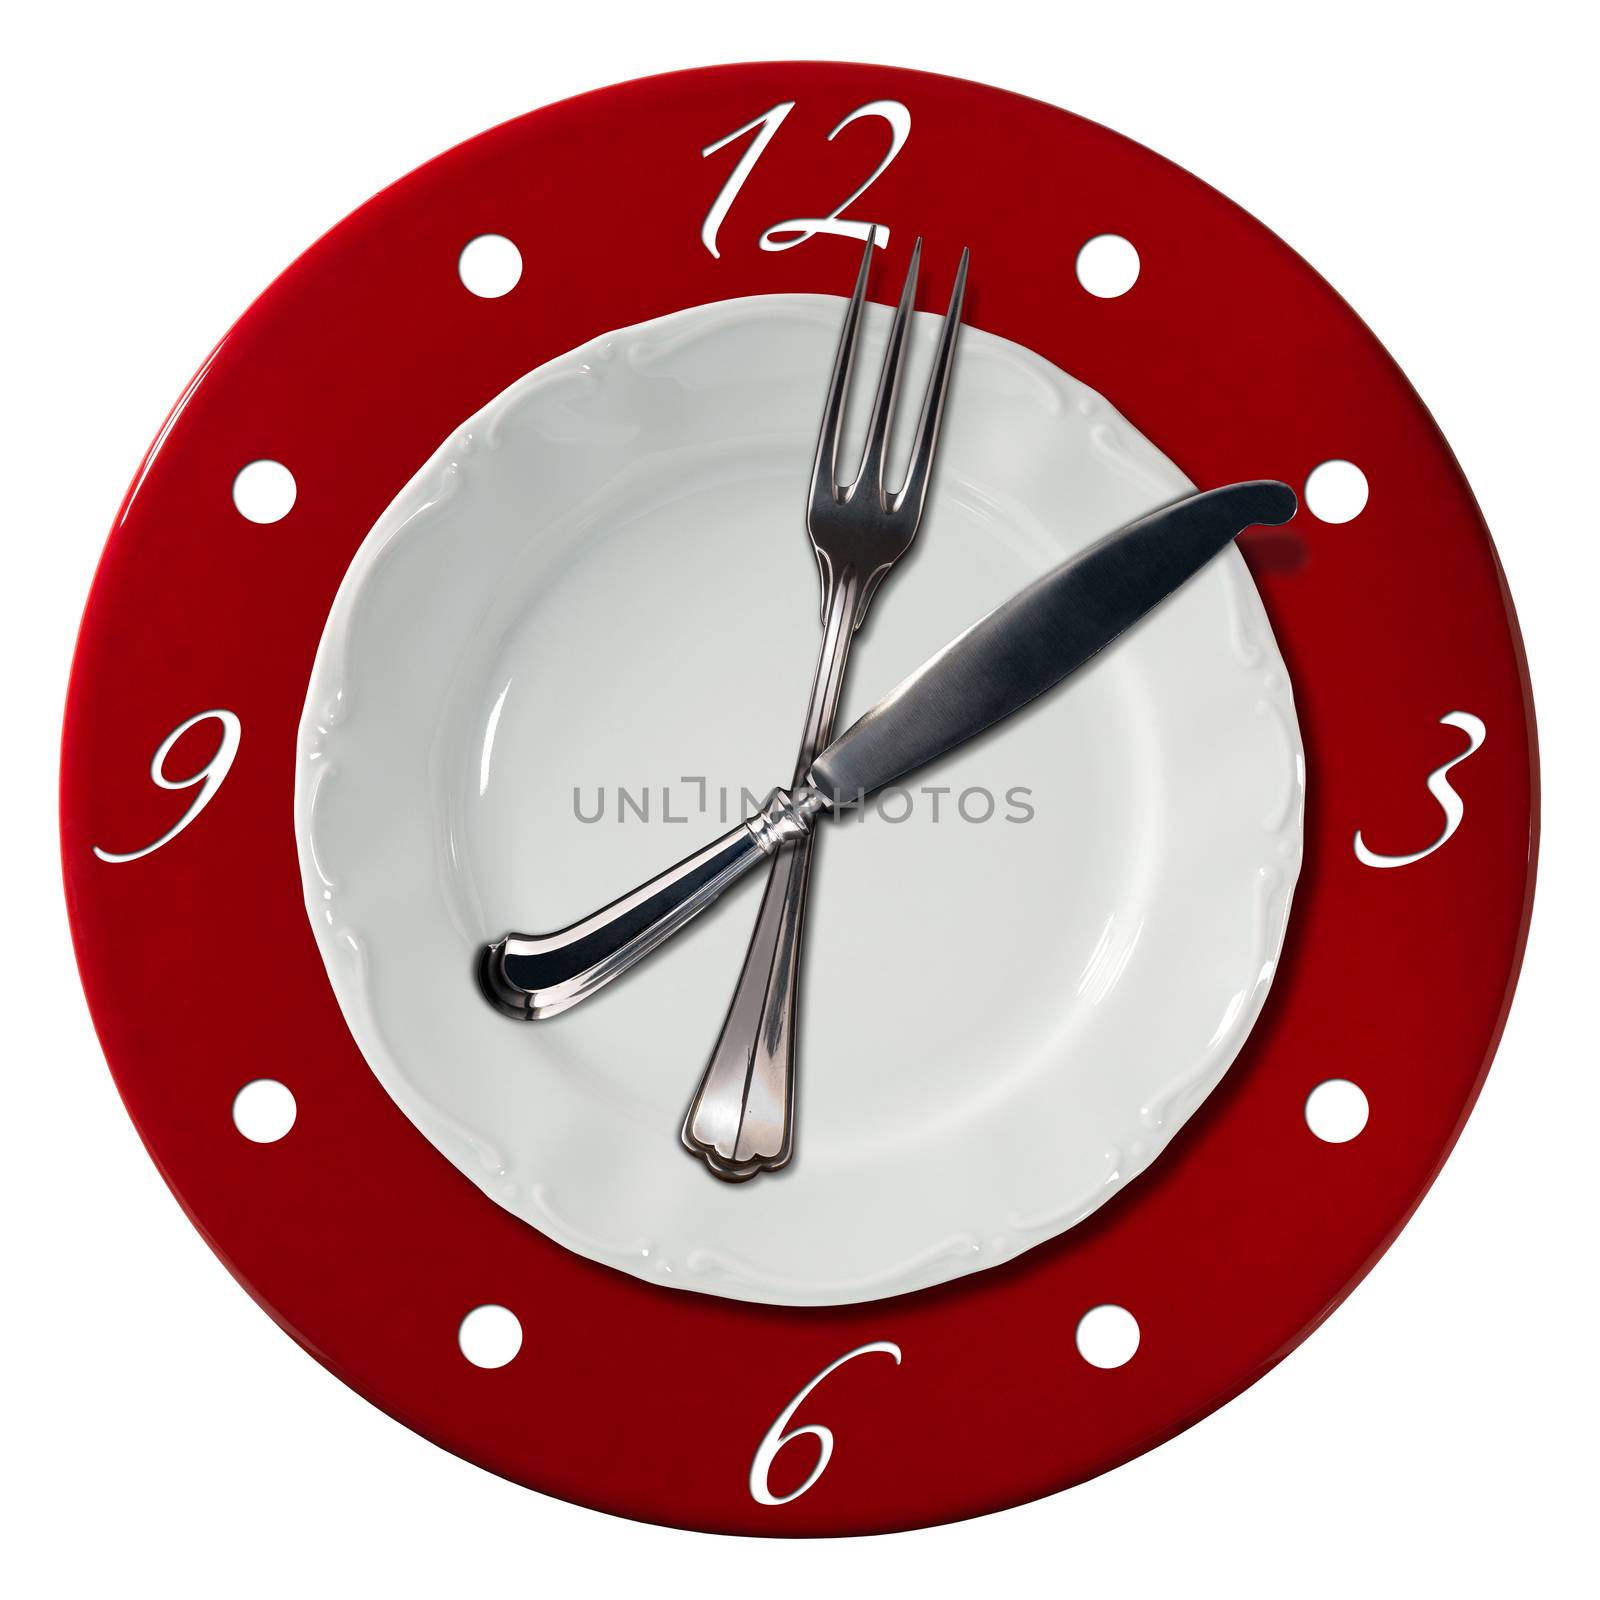 Clock composed by a white plate and a red underplate with fork and knife in the place of the clock hands. Lunch time concept